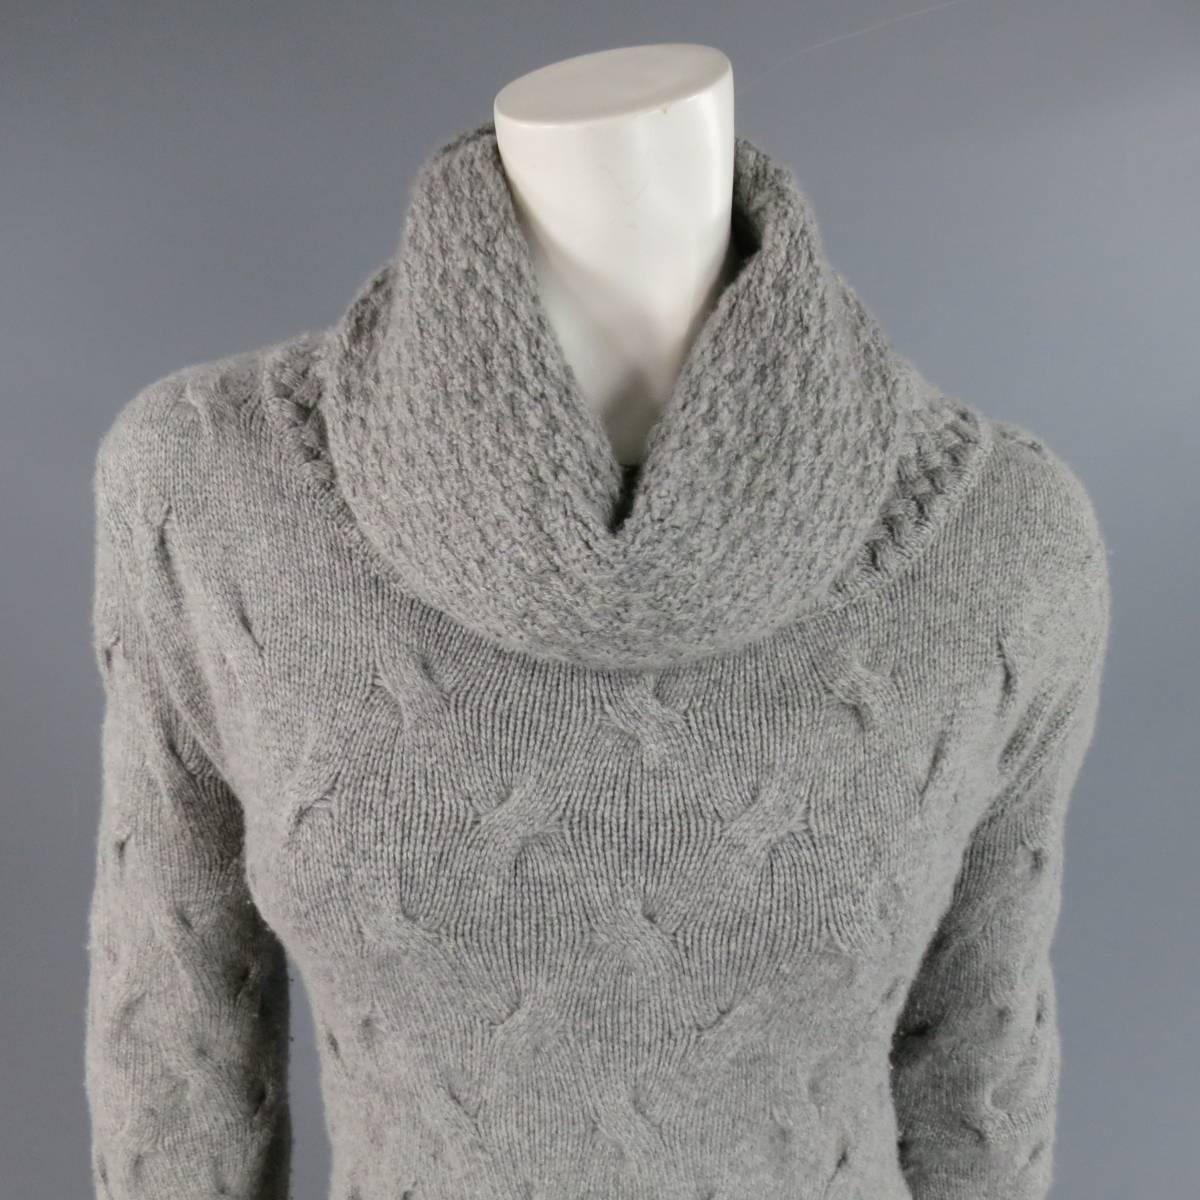 Oversized sweater dress by LORO PIANA in gray cashmere knit with cable like texture featuring a cowl neck and ribbed trim. Made in Italy.
 
Good Pre-Owned Condition.
Marked: IT 44
 
Measurements:
 
Shoulder: 17 in.
Bust: 44 in.
Waist: 38